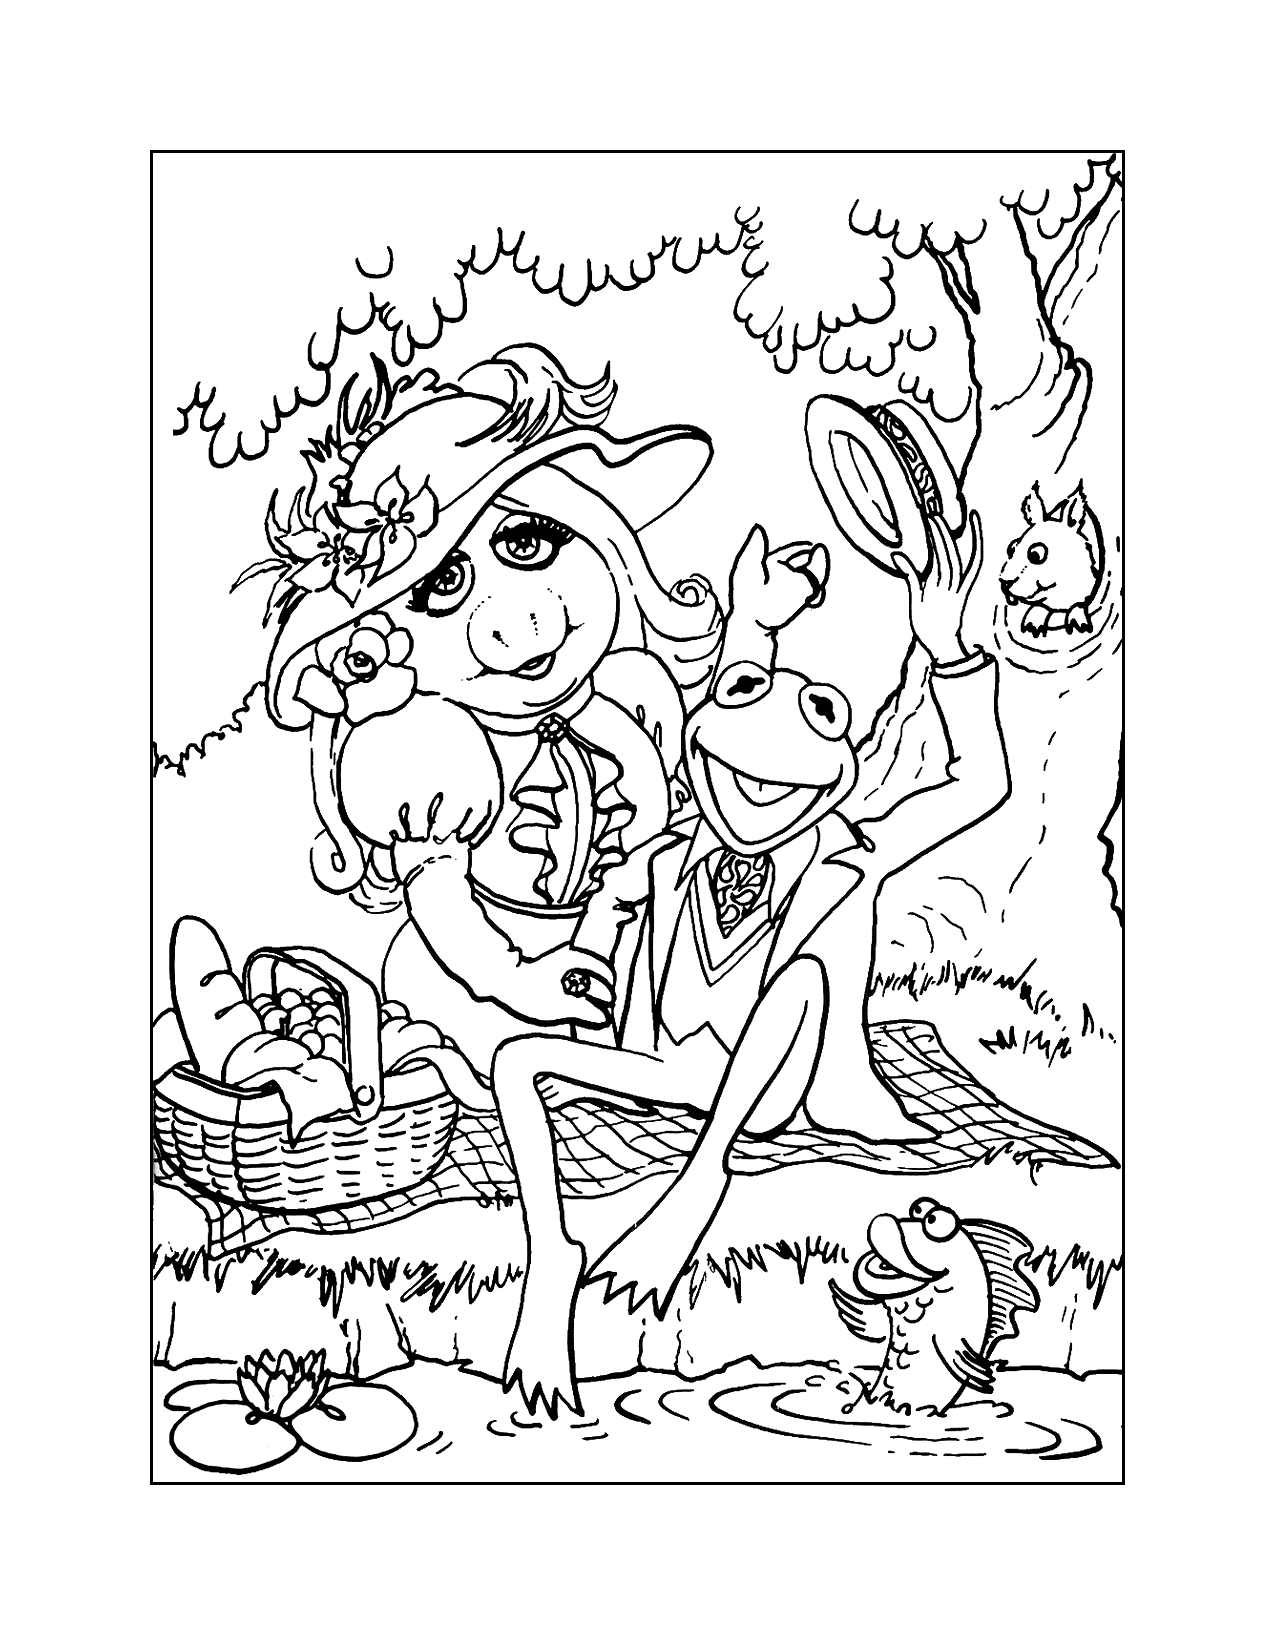 Kermit And Miss Piggy On A Picnic Coloring Page